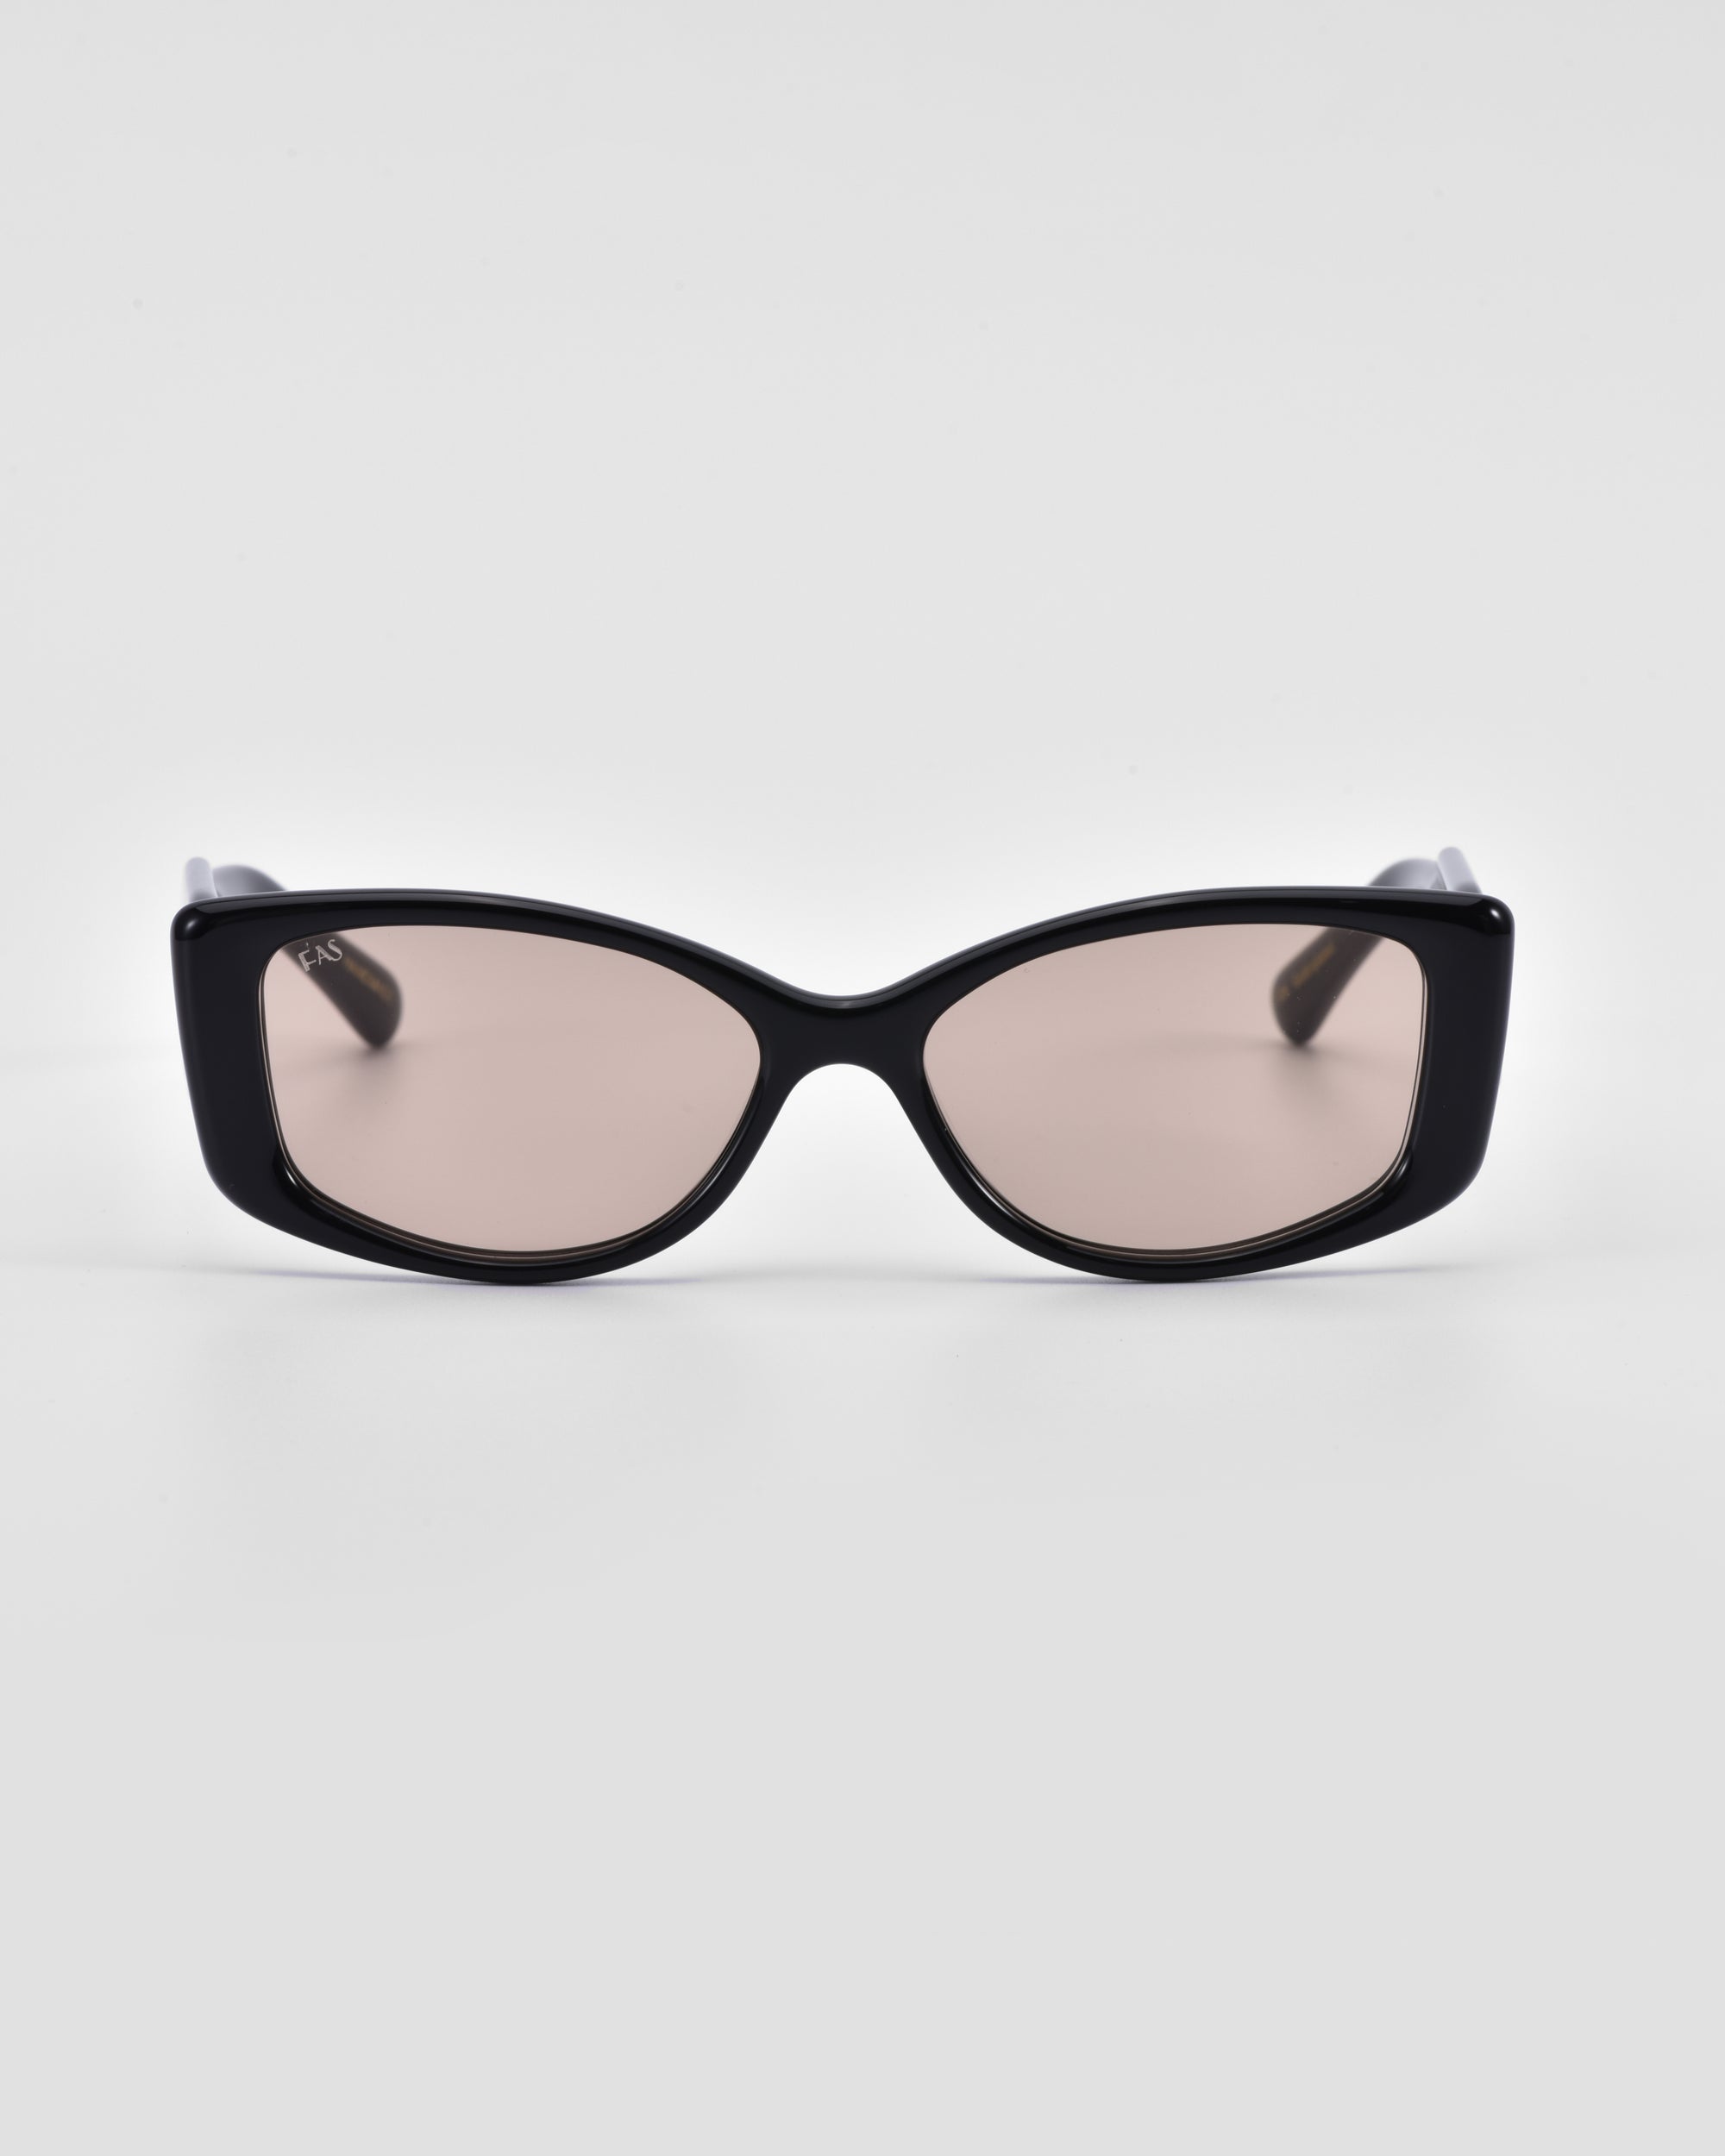 A pair of Mene sunglasses by For Art&#39;s Sake® with light brown tinted lenses set against a plain white background. The frames have a sleek, modern design, exuding an air of luxury.